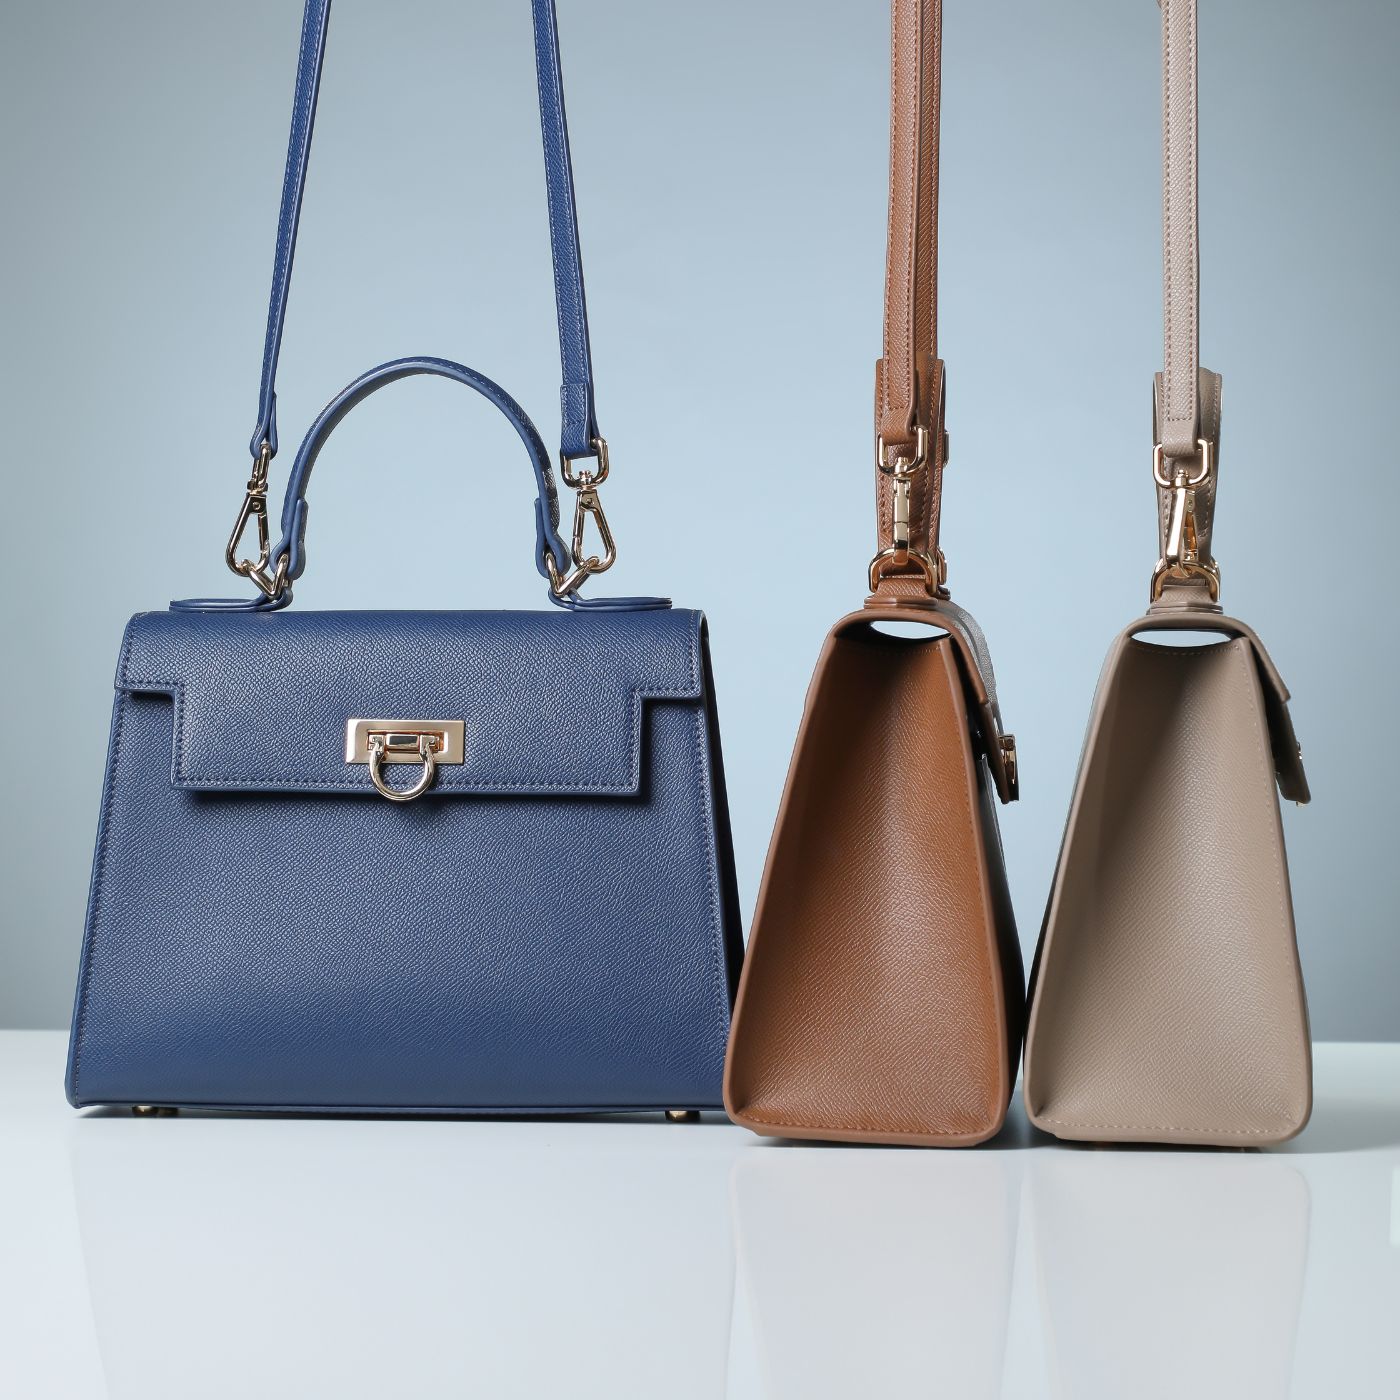 Three layla top handle handbags of different colors, navy blue, Brown and taupe can be woren as a satchel or a crossbody bag